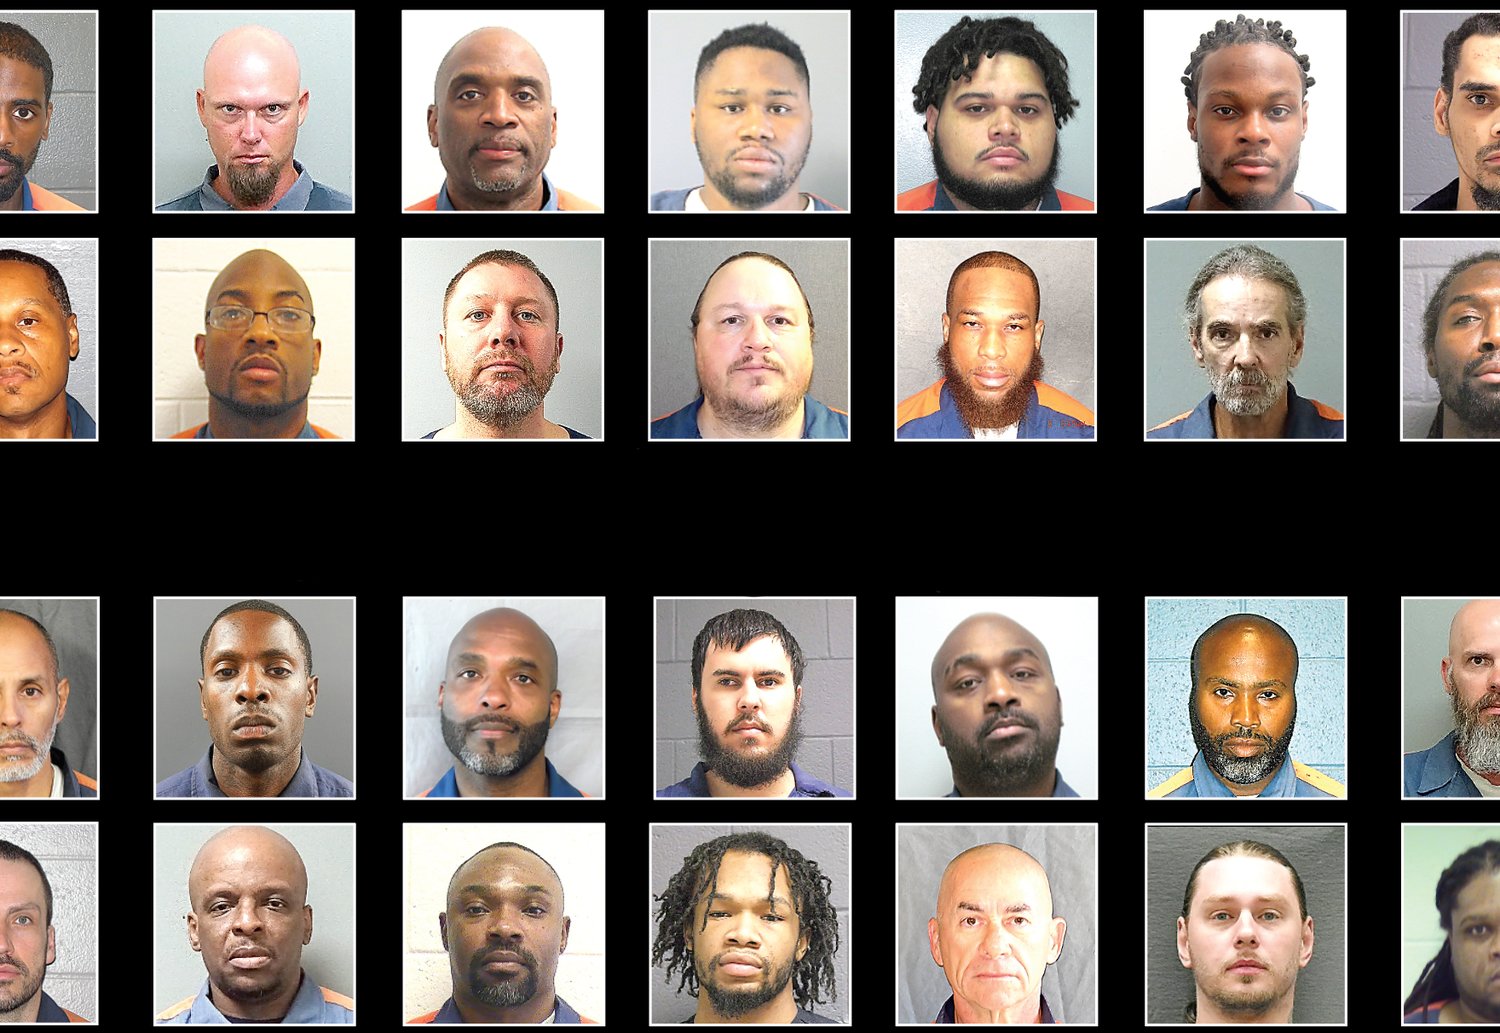 Ninety men and women, who are pictured on the cover and on these pages, have been convicted of first-degree murder in Ingham County and are serving sentences of life without parole.